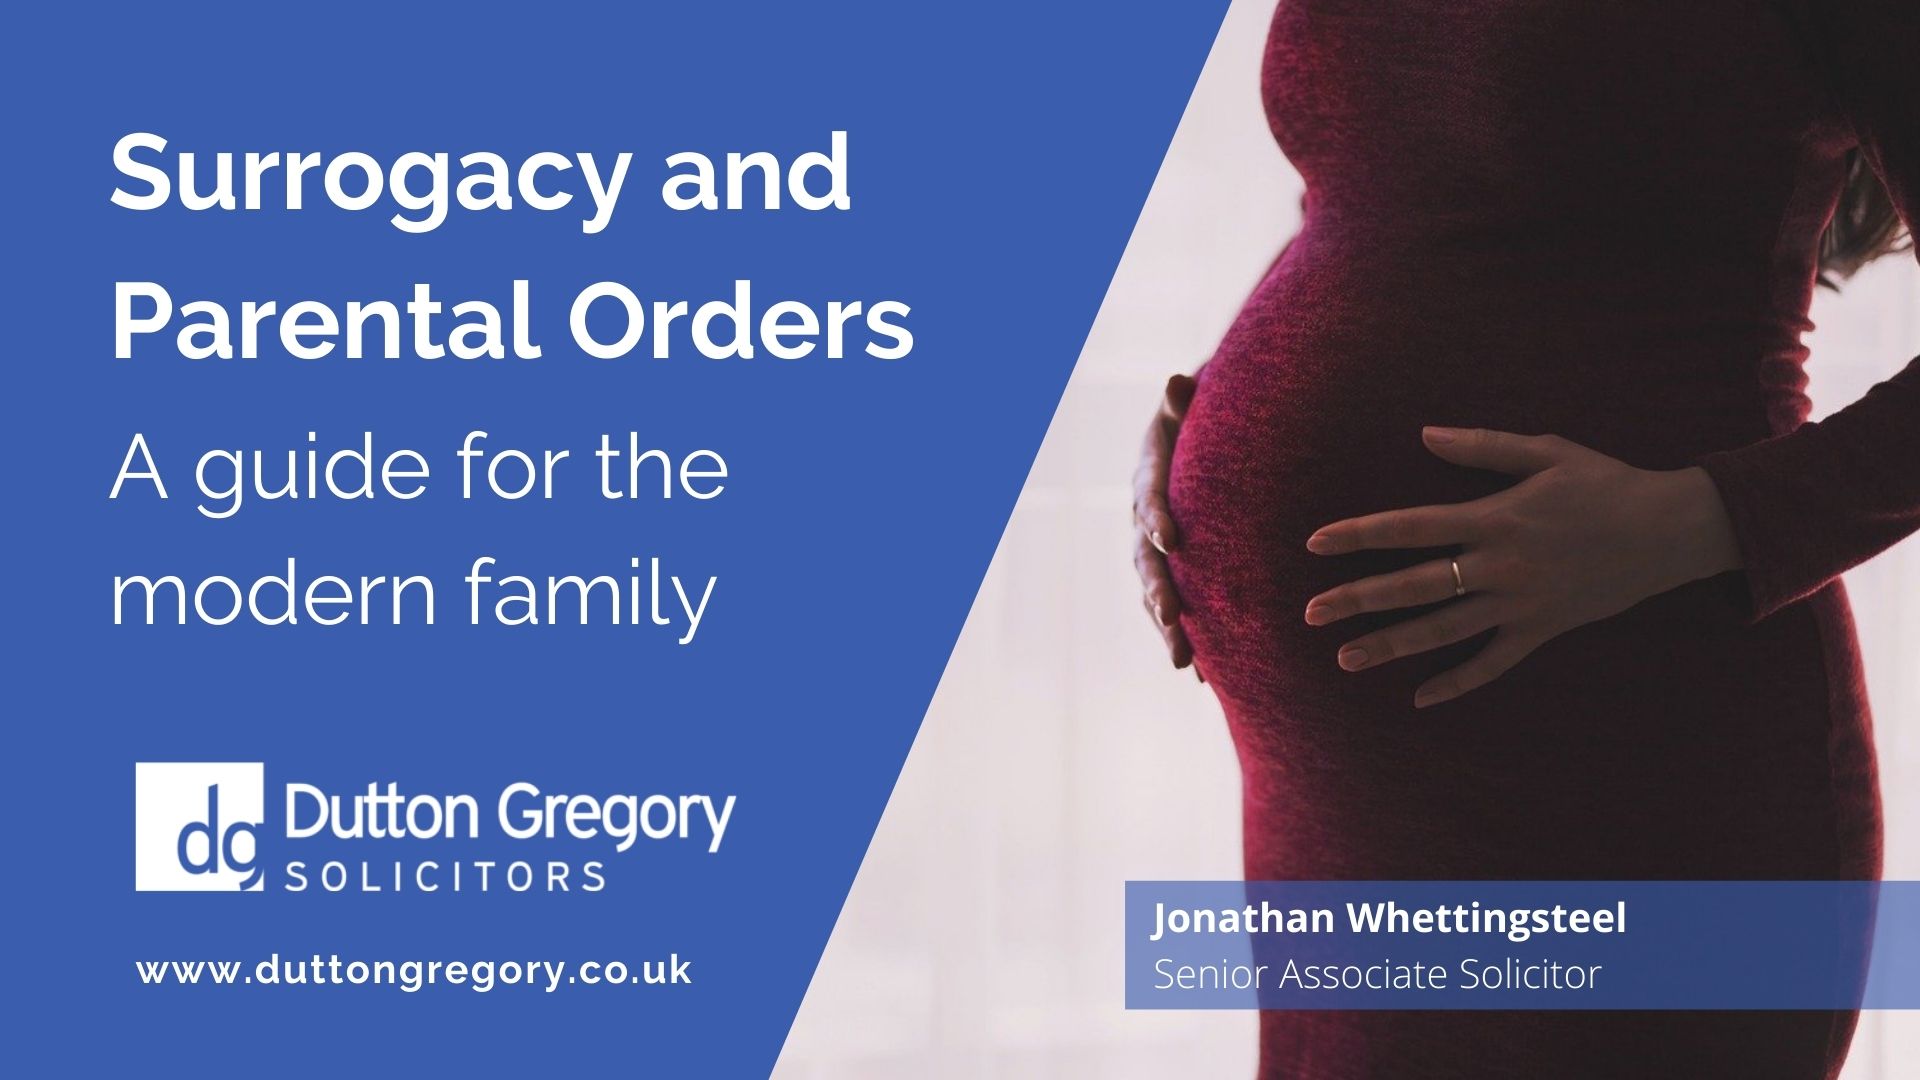 Surrogacy and Parental Orders - A Guide for the Modern Family